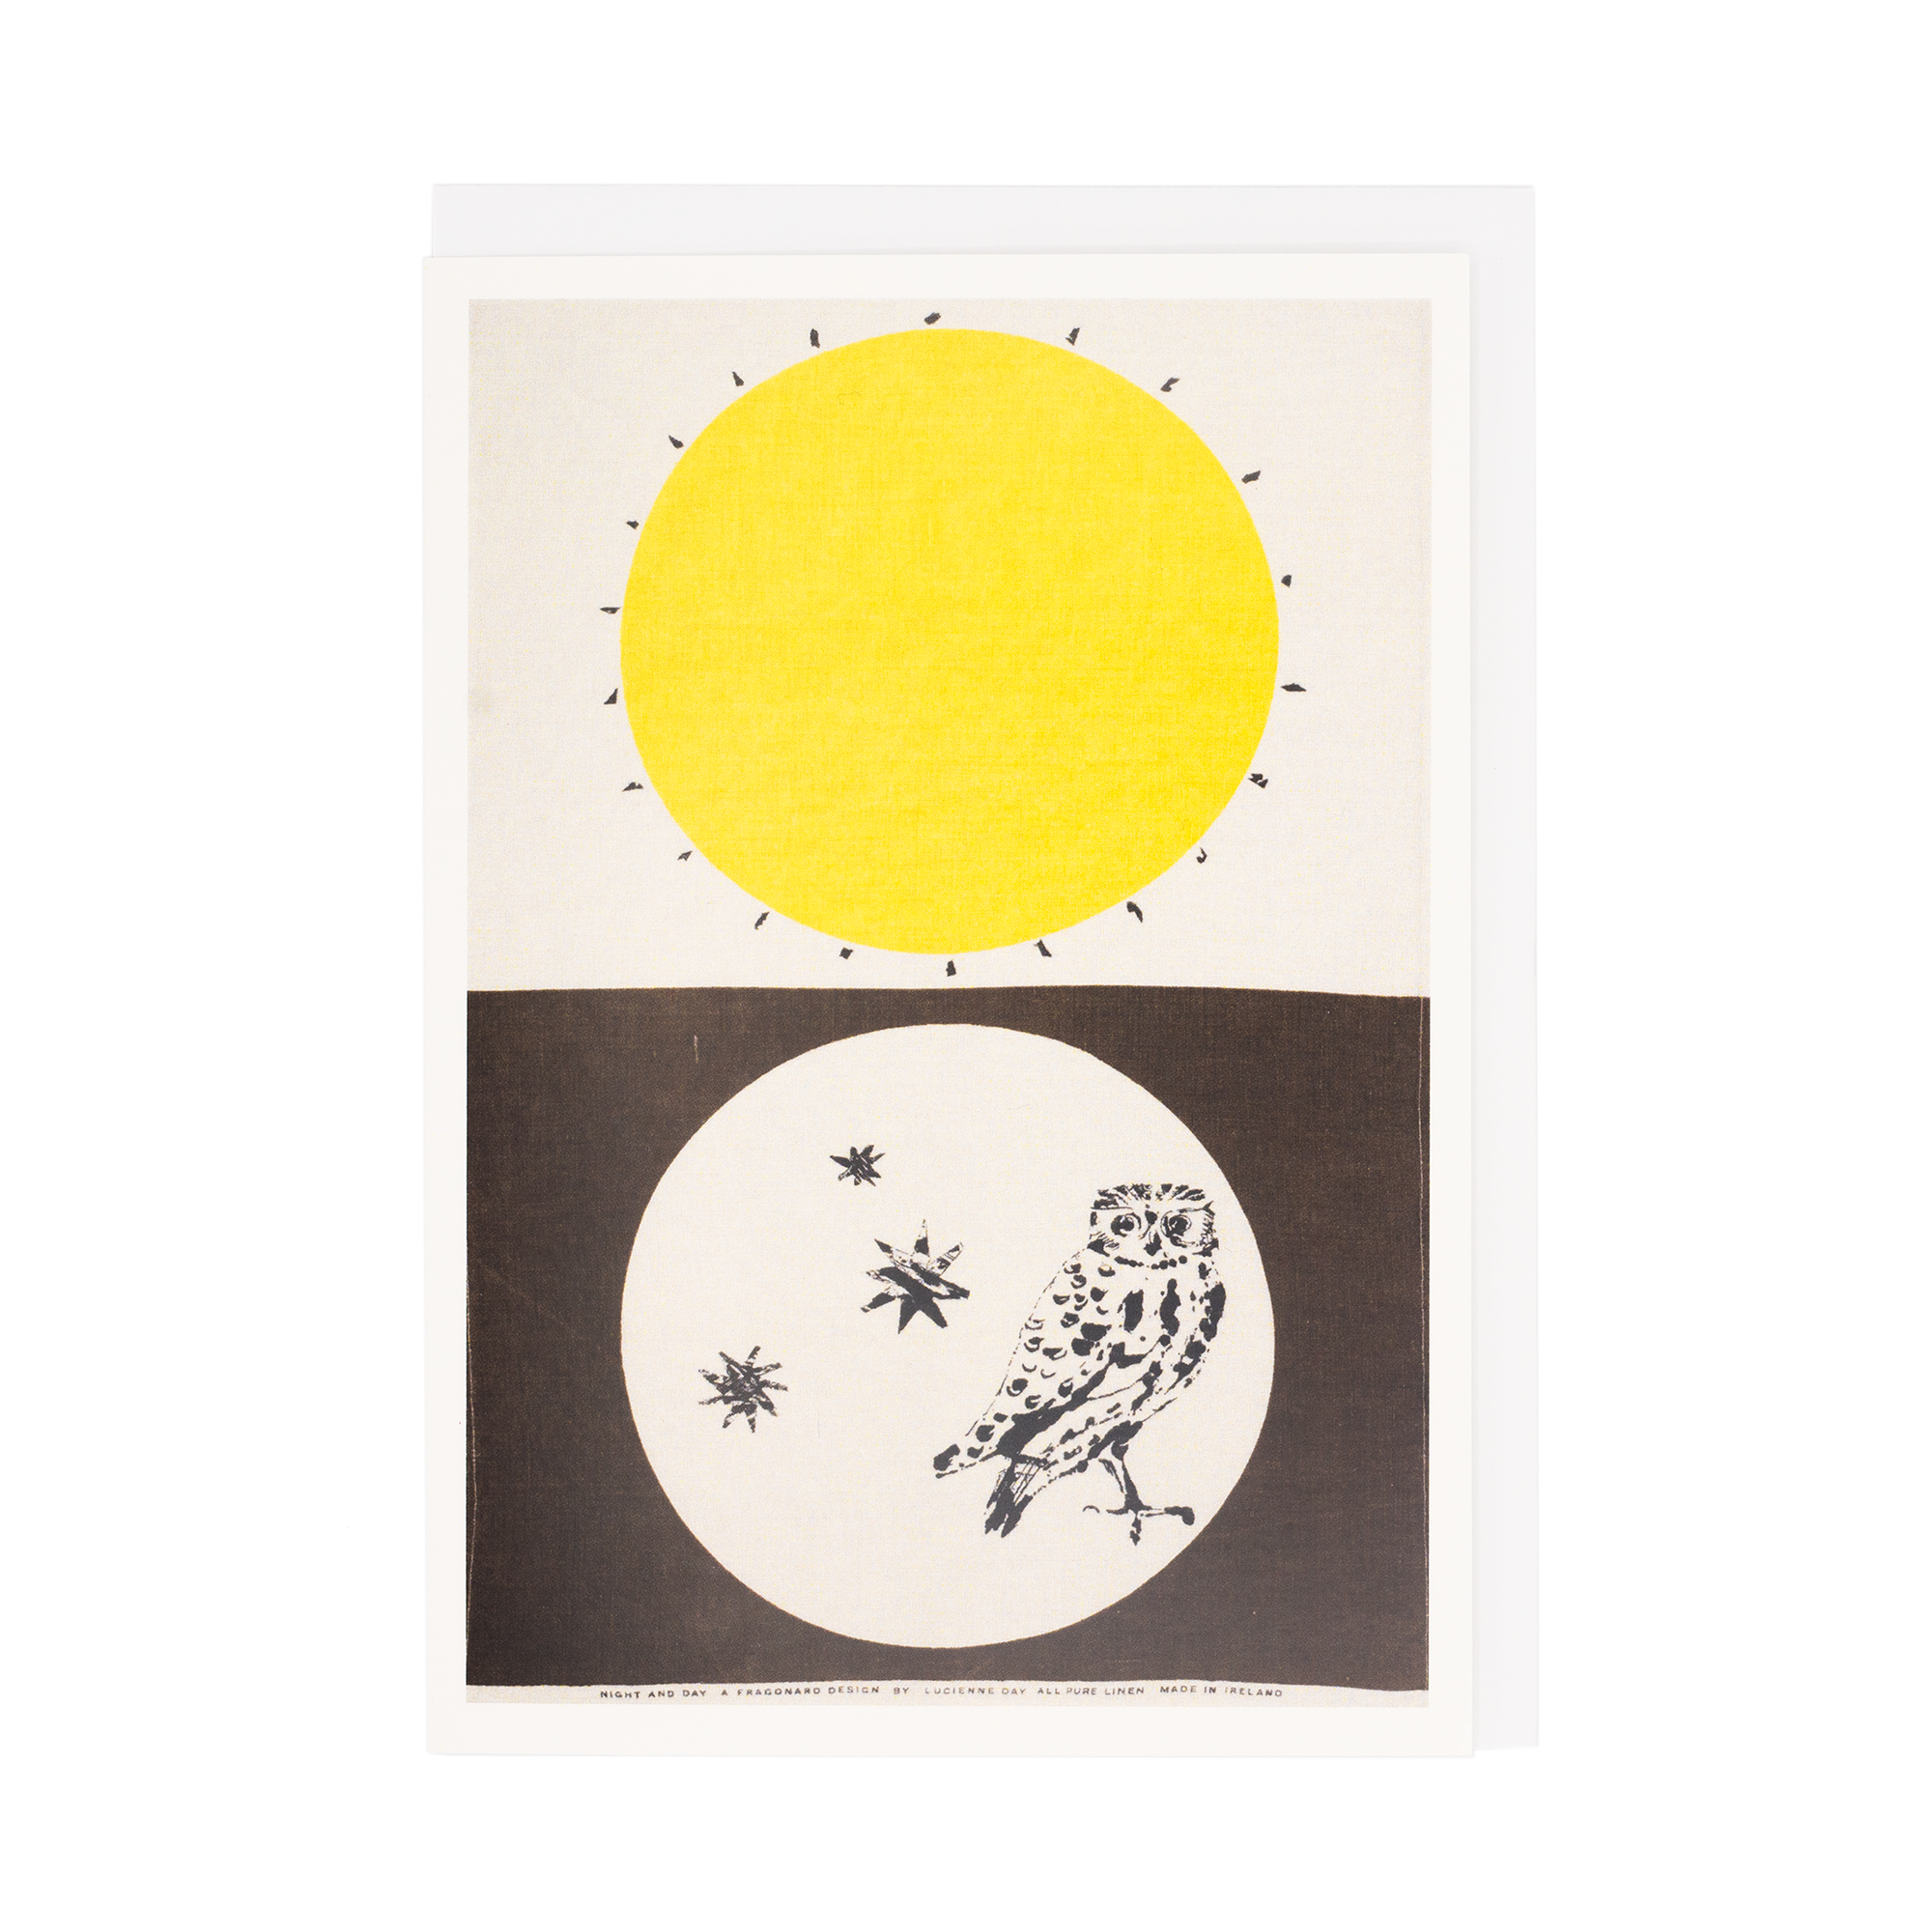 Image of 'Night & Day' greetings card, Lucienne Day. Top half of design is yellow sun, bottom is white design with black owl